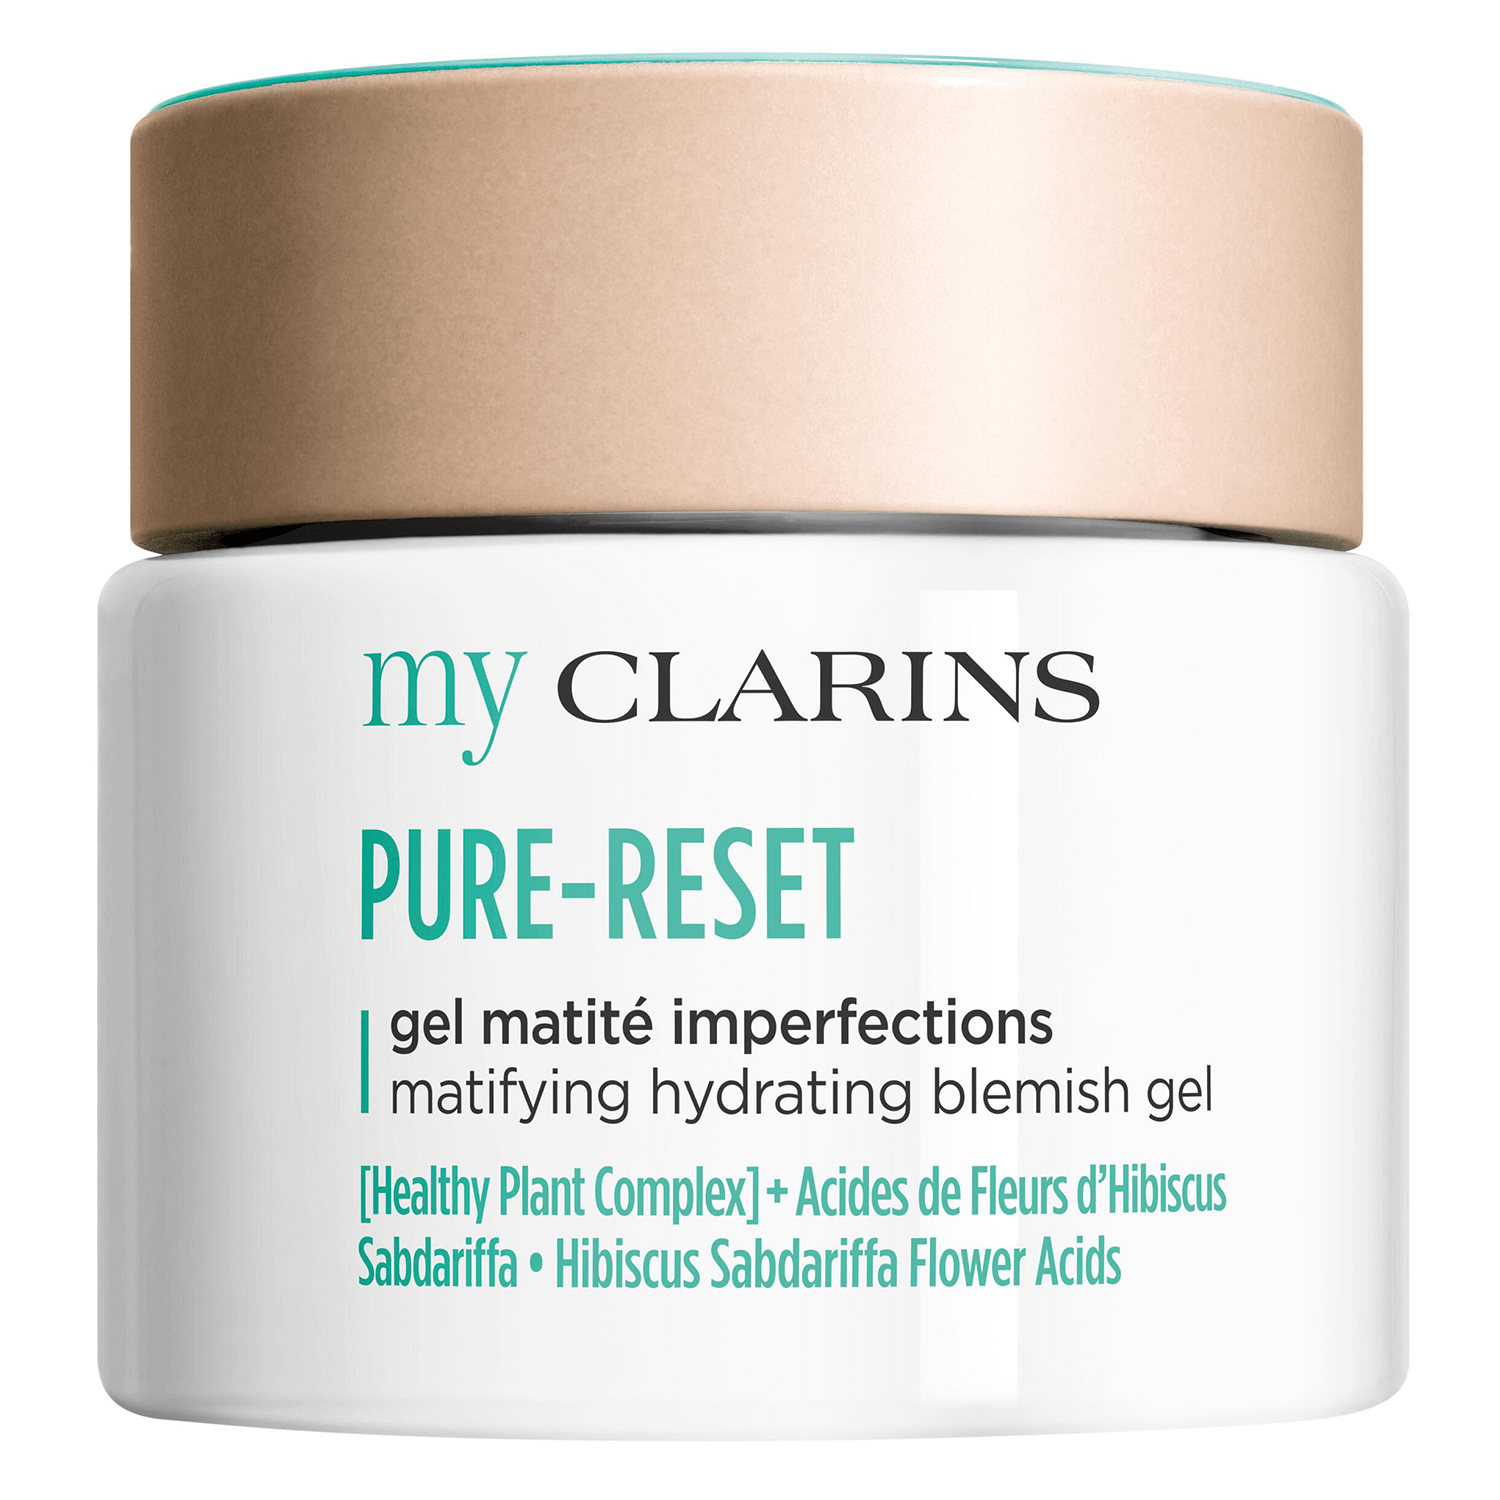 Product image from myClarins - PURE-RESET matifying hydrating blemish gel